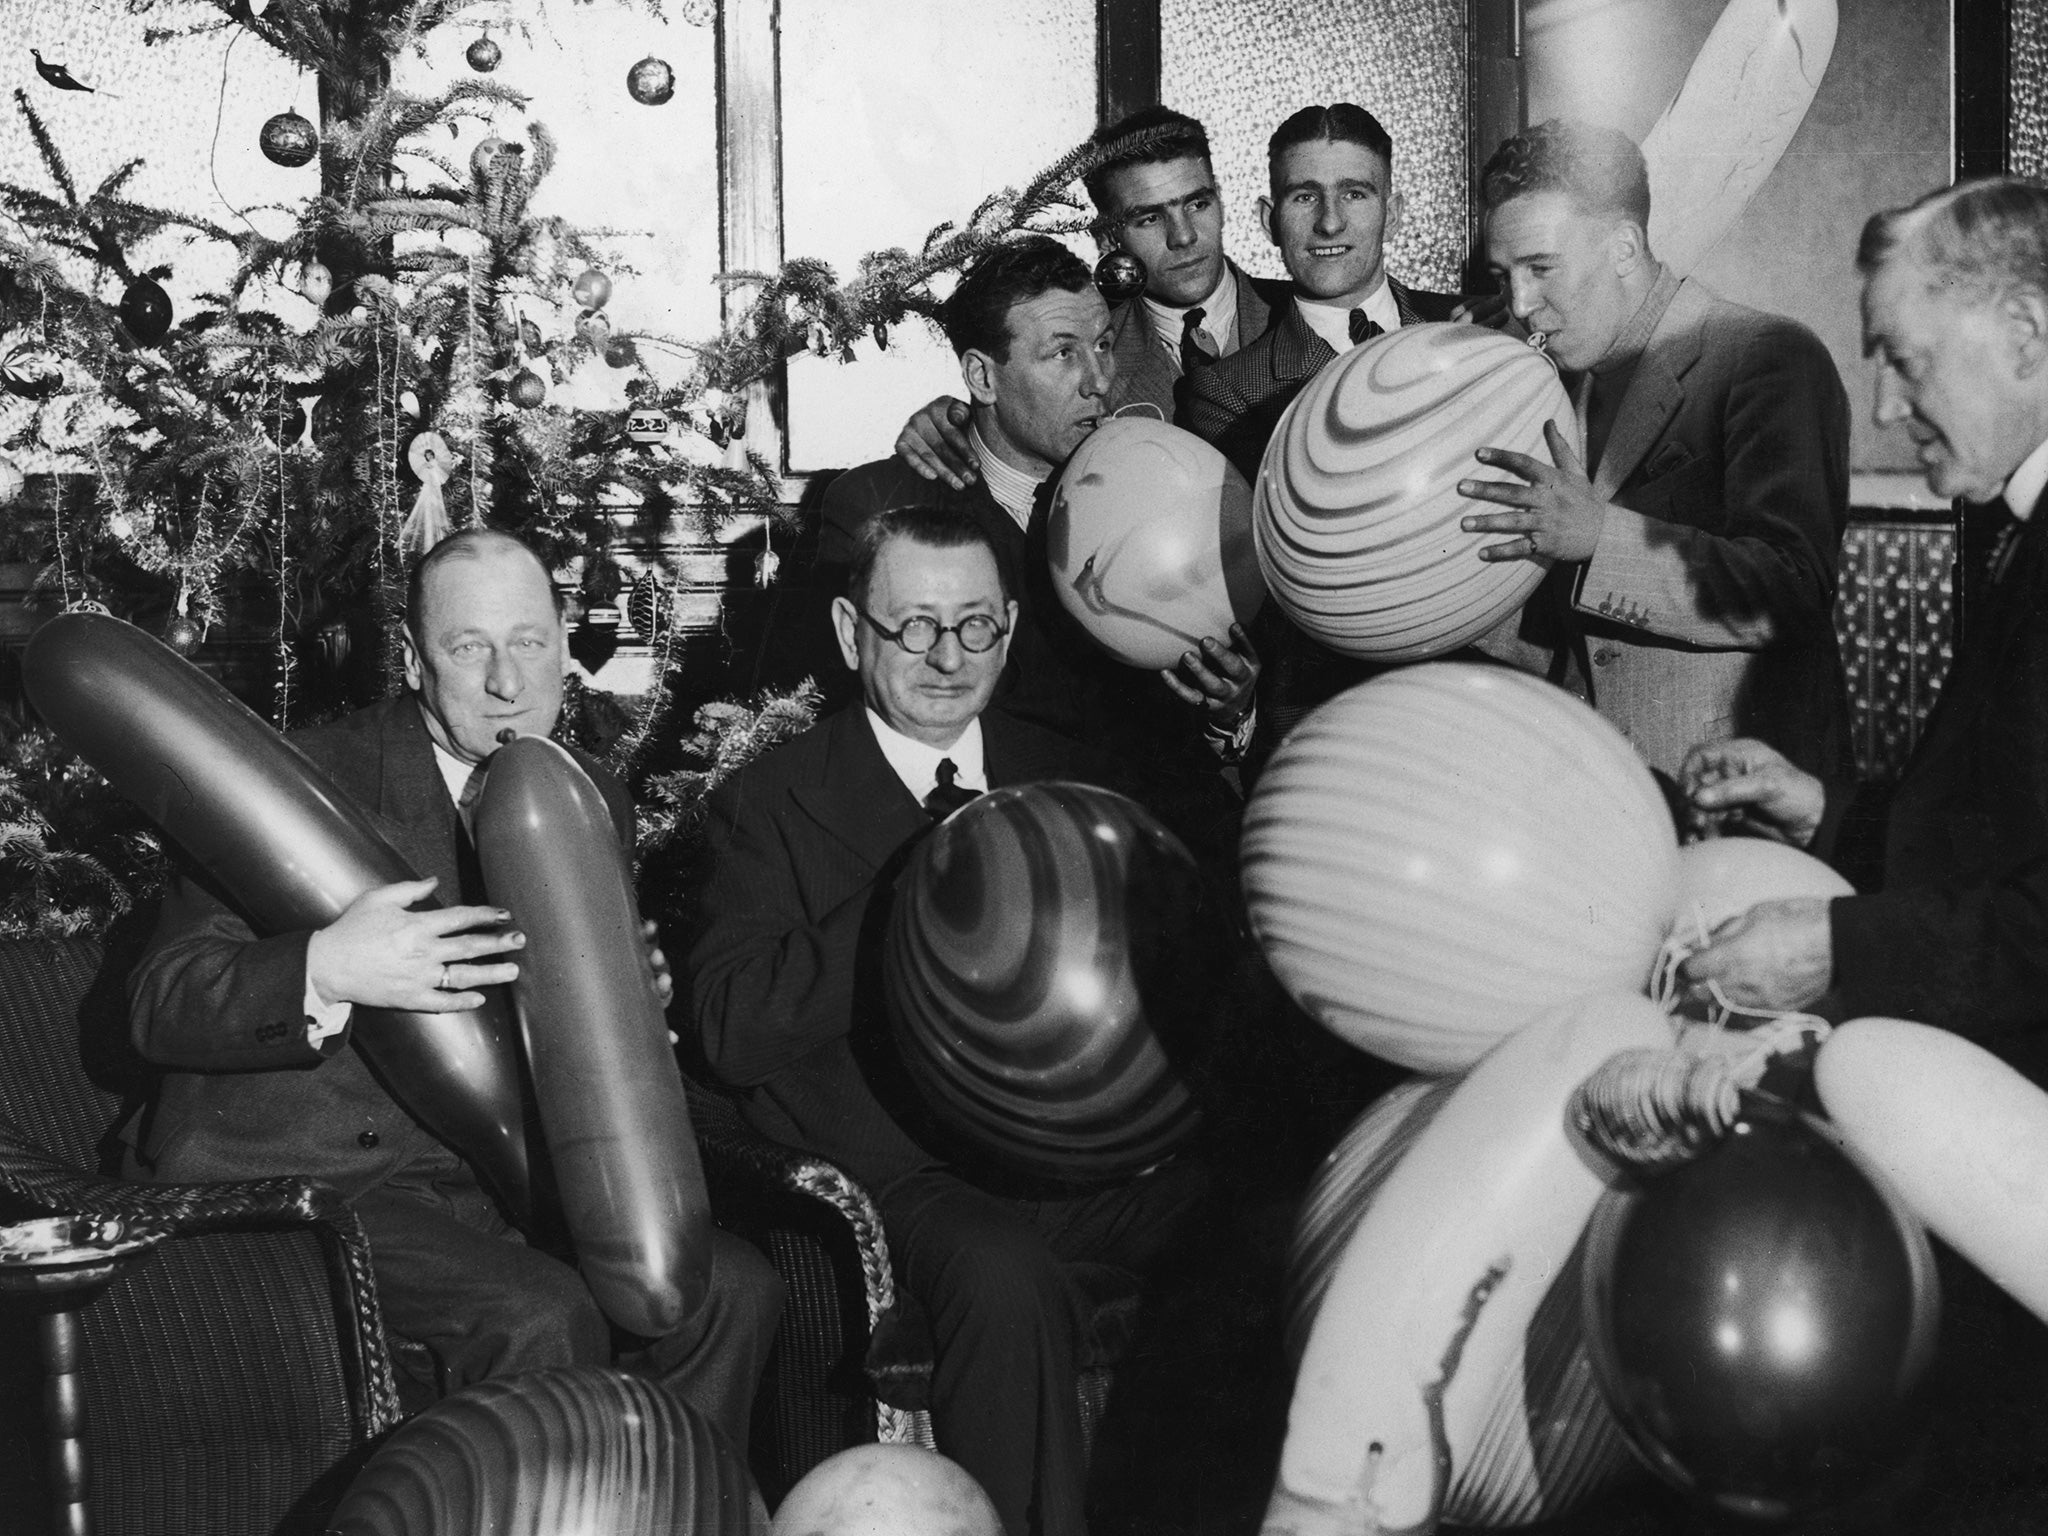 Liverpool’s players and directors show the likes of Raheem Sterling and Jack Grealish a more benign form of balloon fun at their 1936 Christmas party